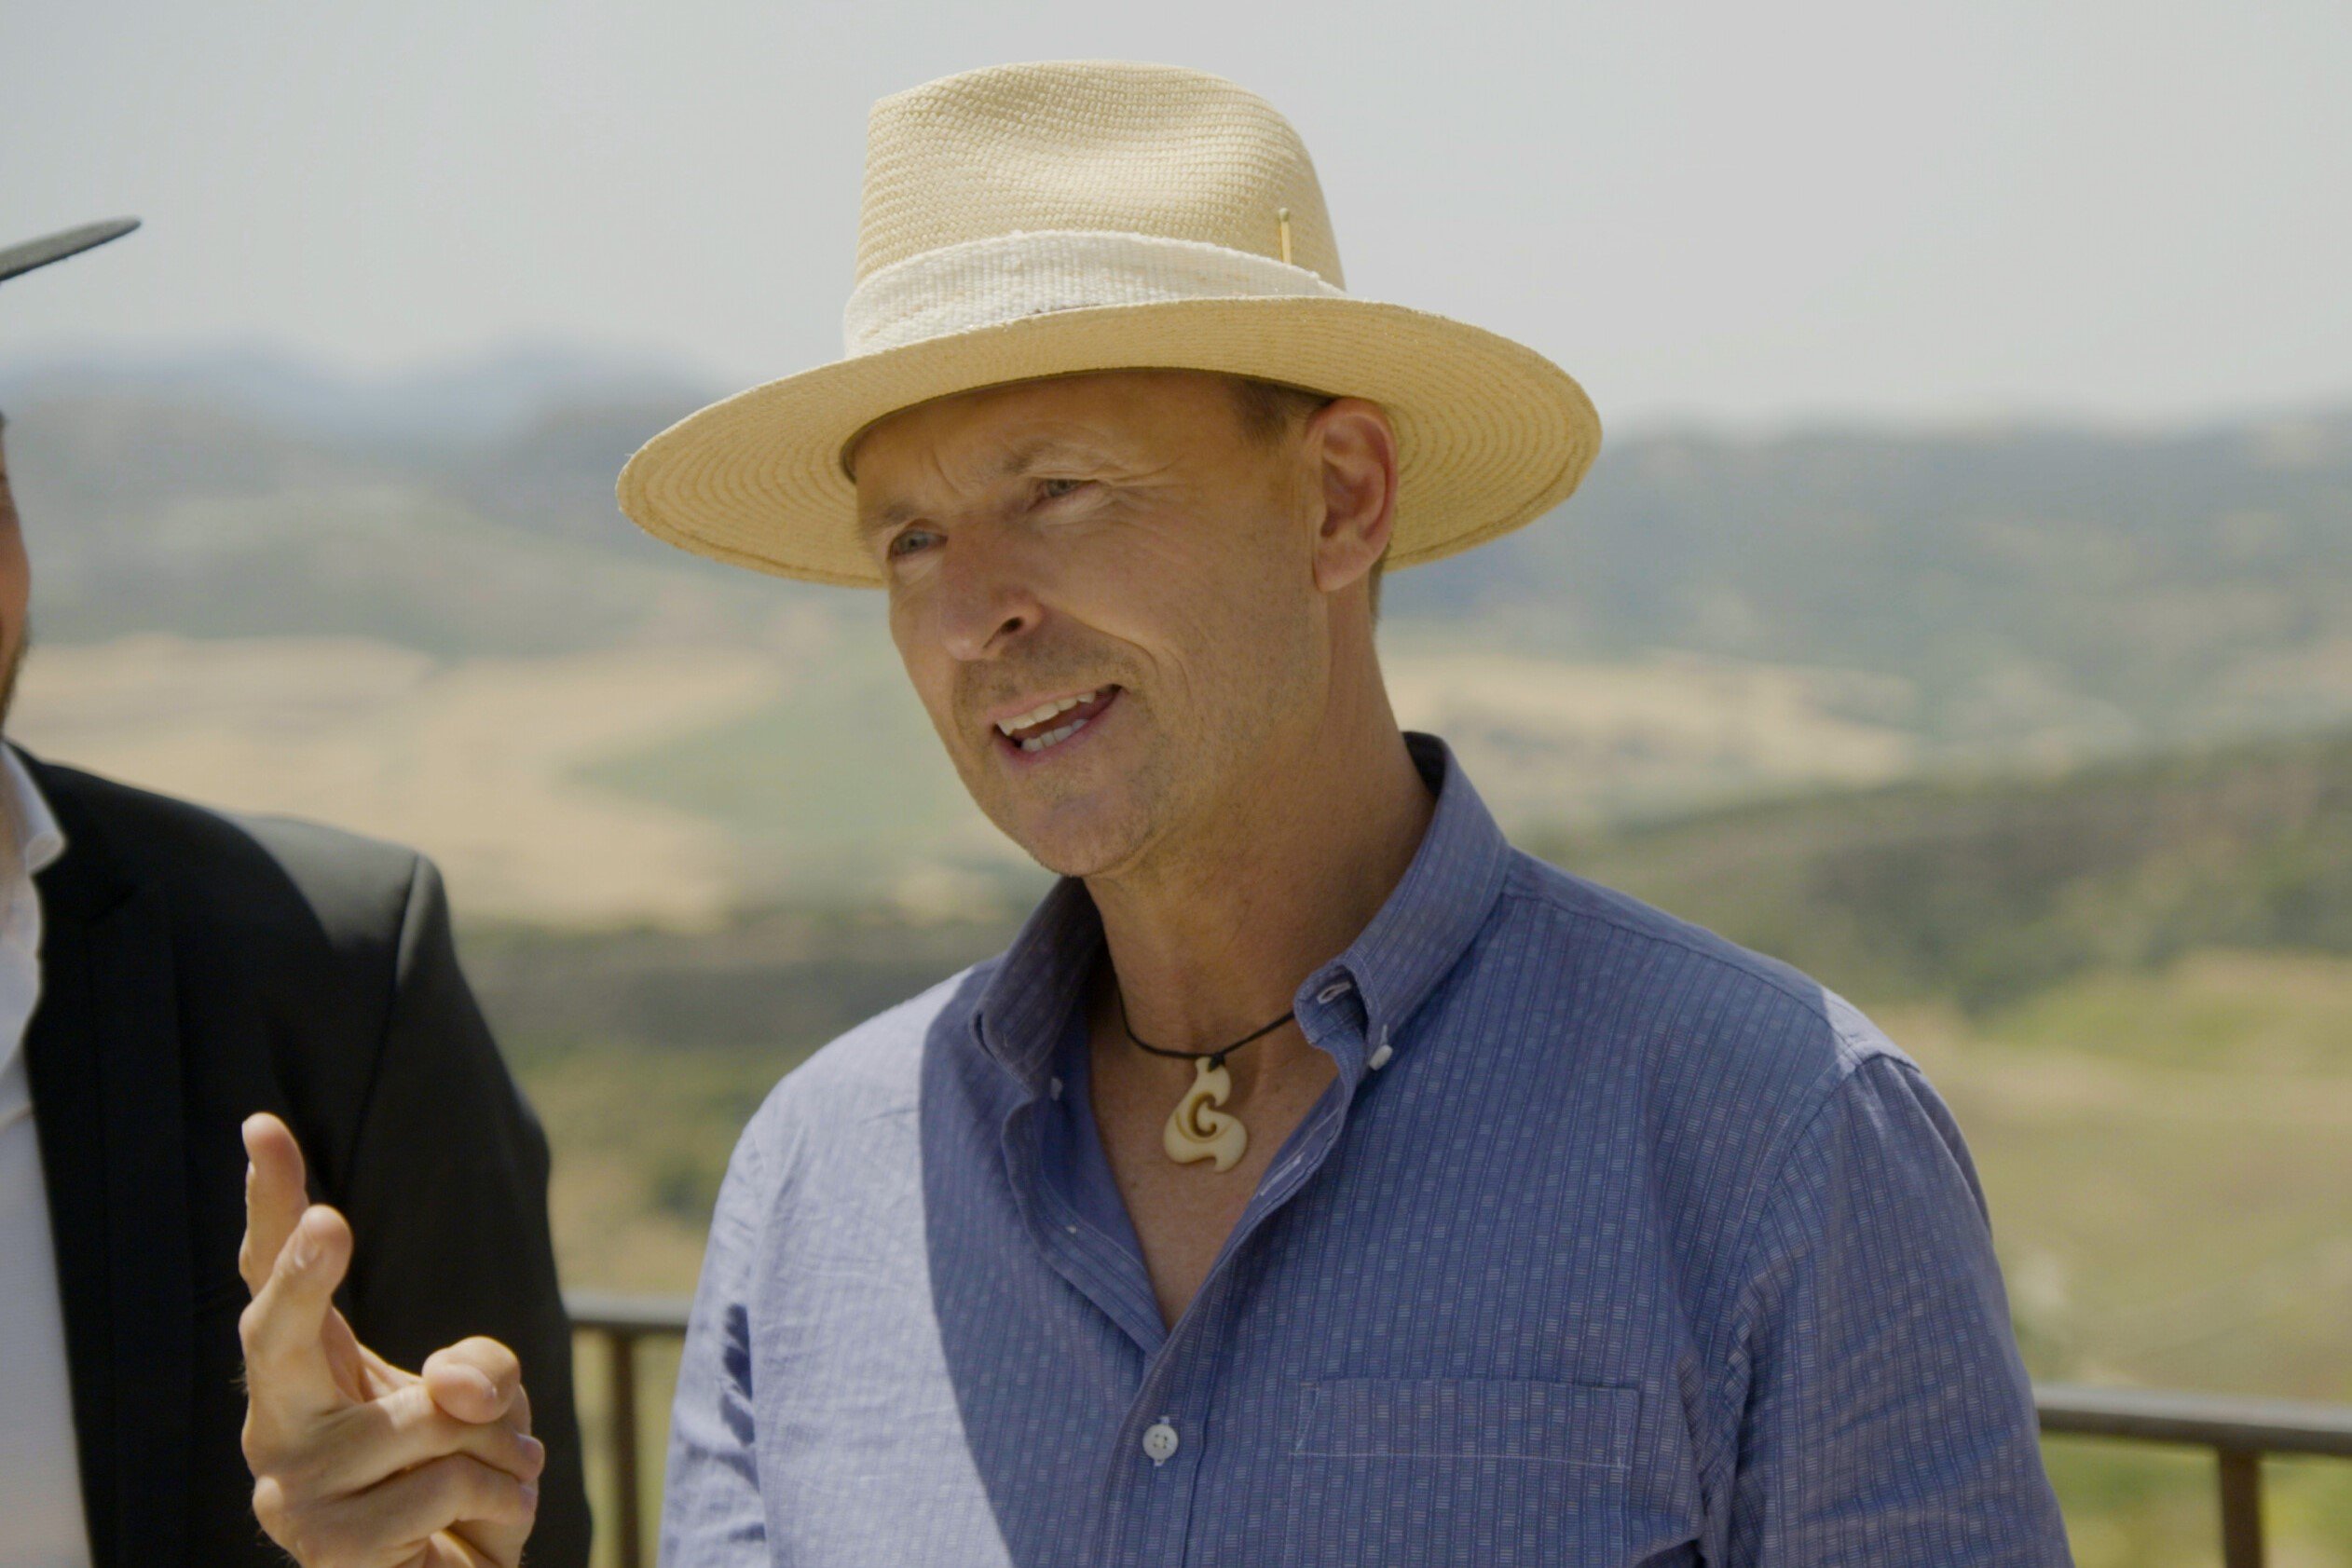 Phil Keoghan, who hosts a new episode of 'The Amazing Race 34' tonight on CBS, wears a blue button-down shirt and tan hat.